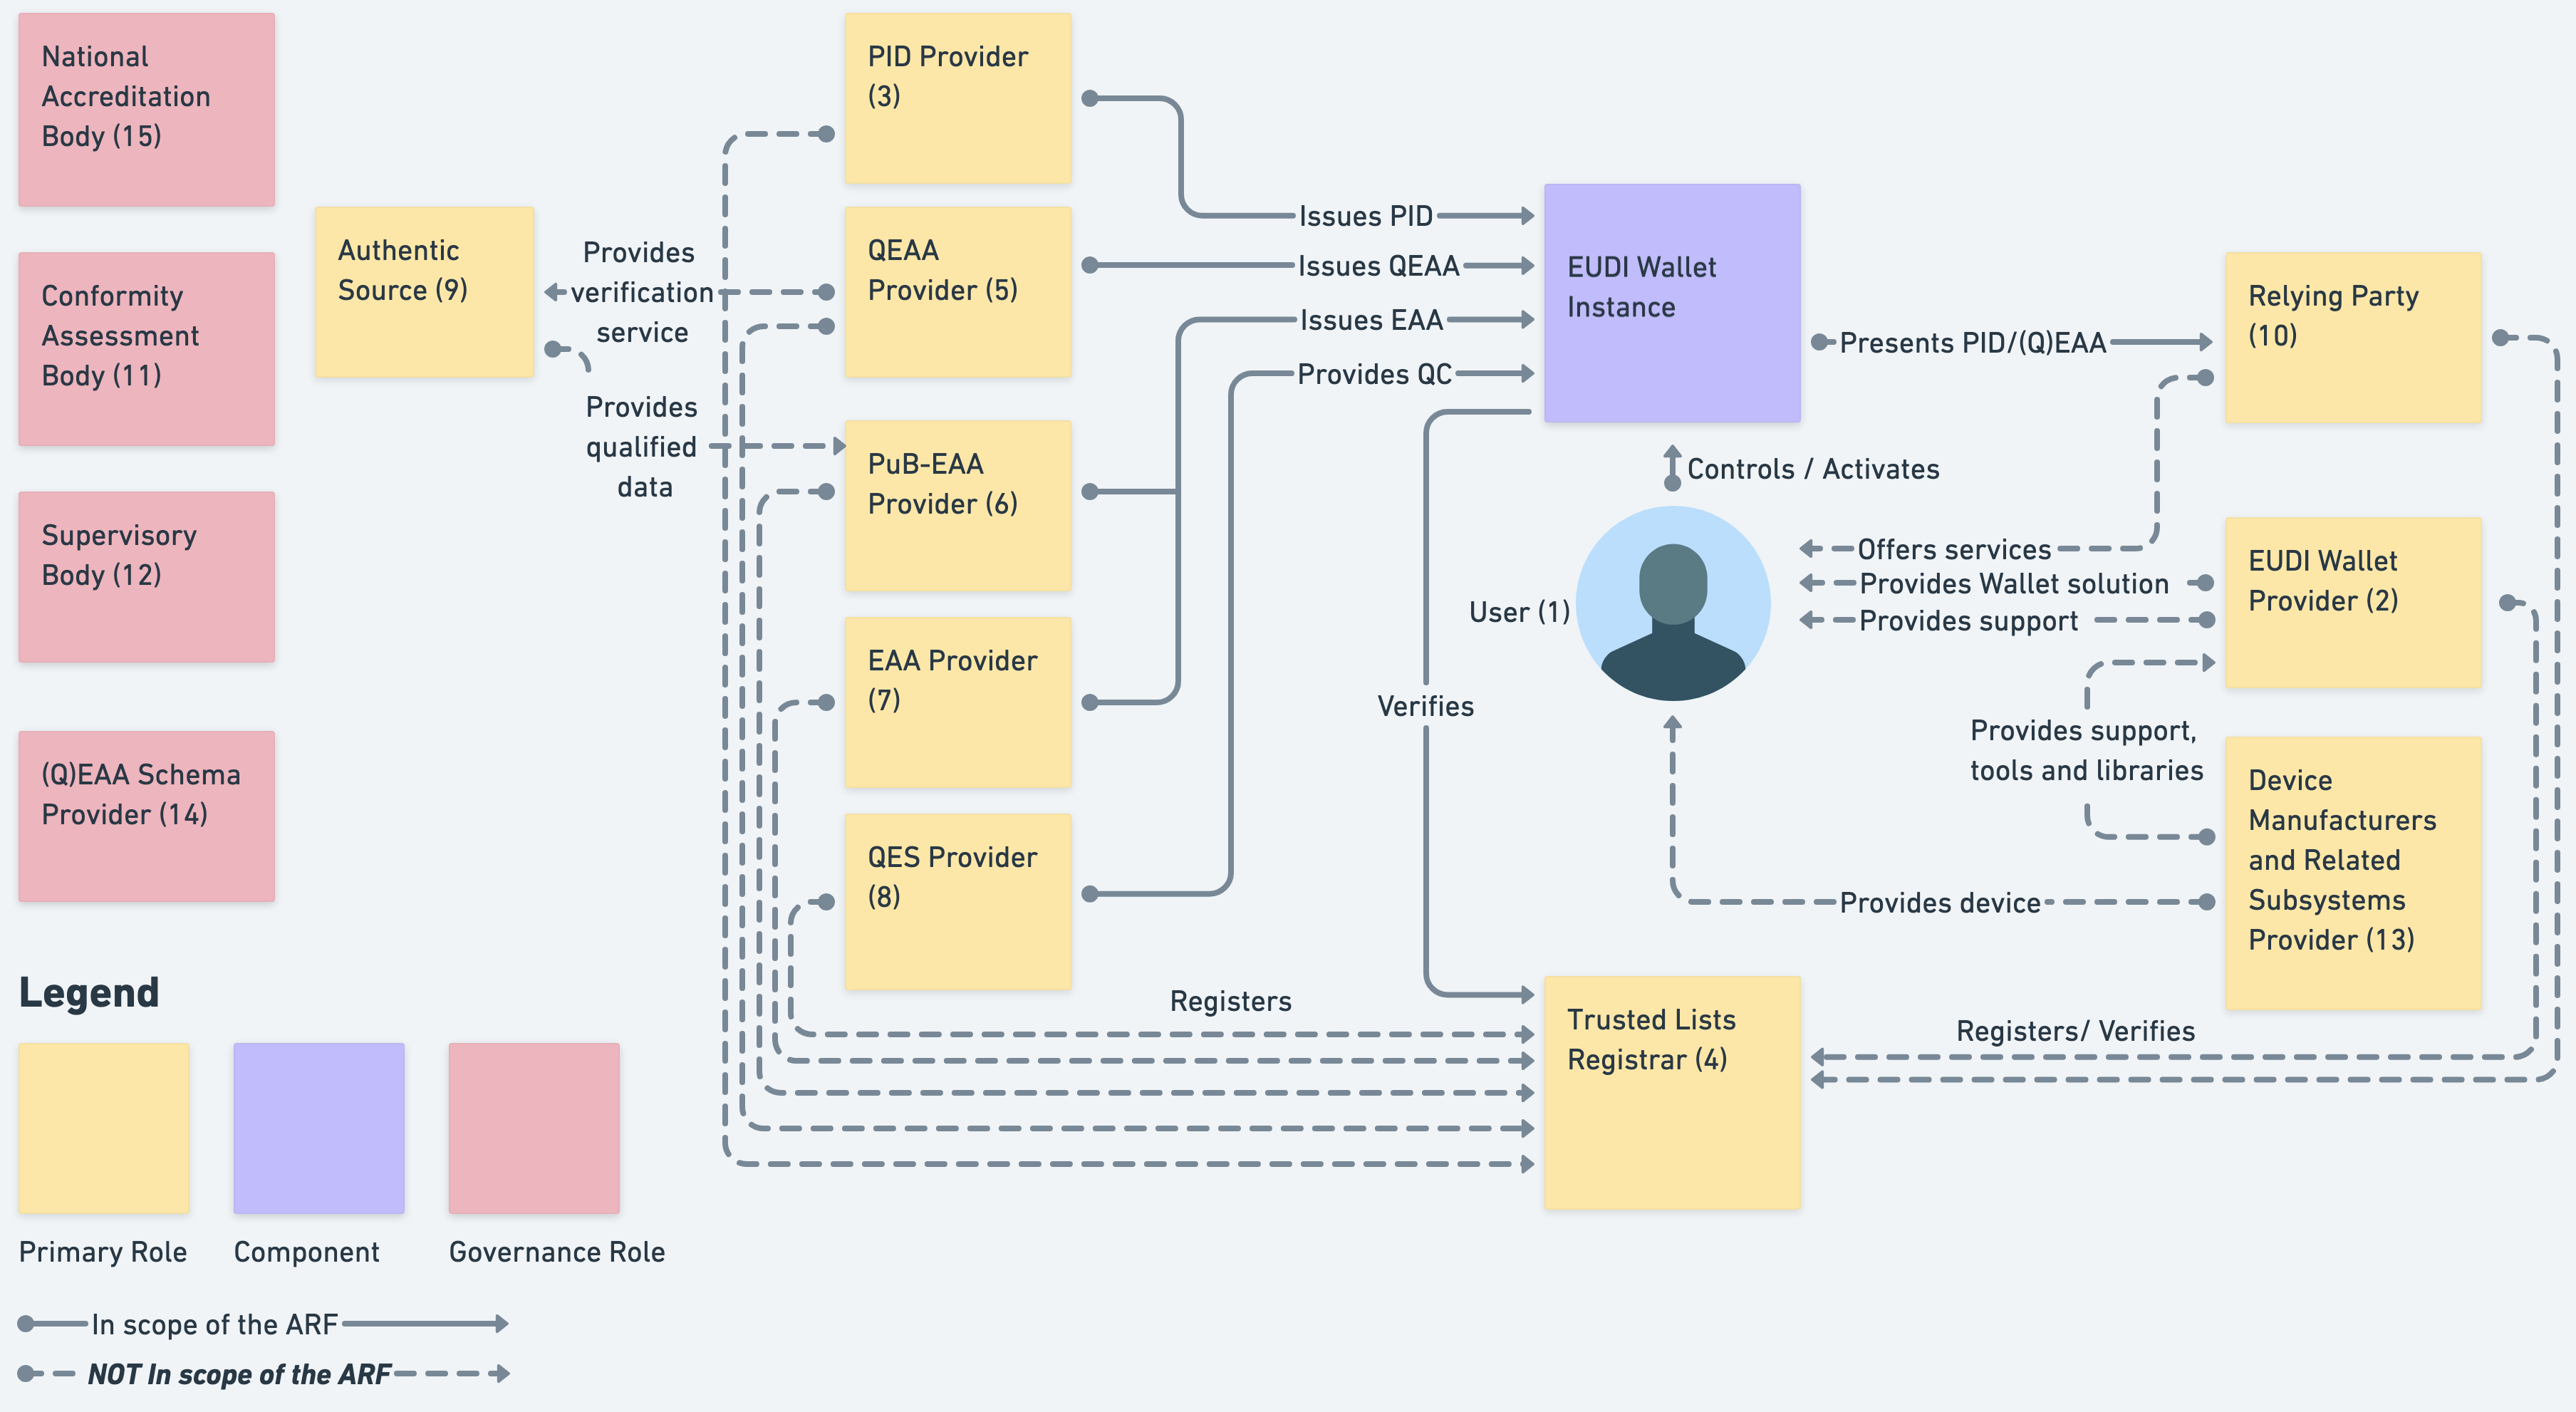 Figure 1: Overview of the EUDI Wallet roles